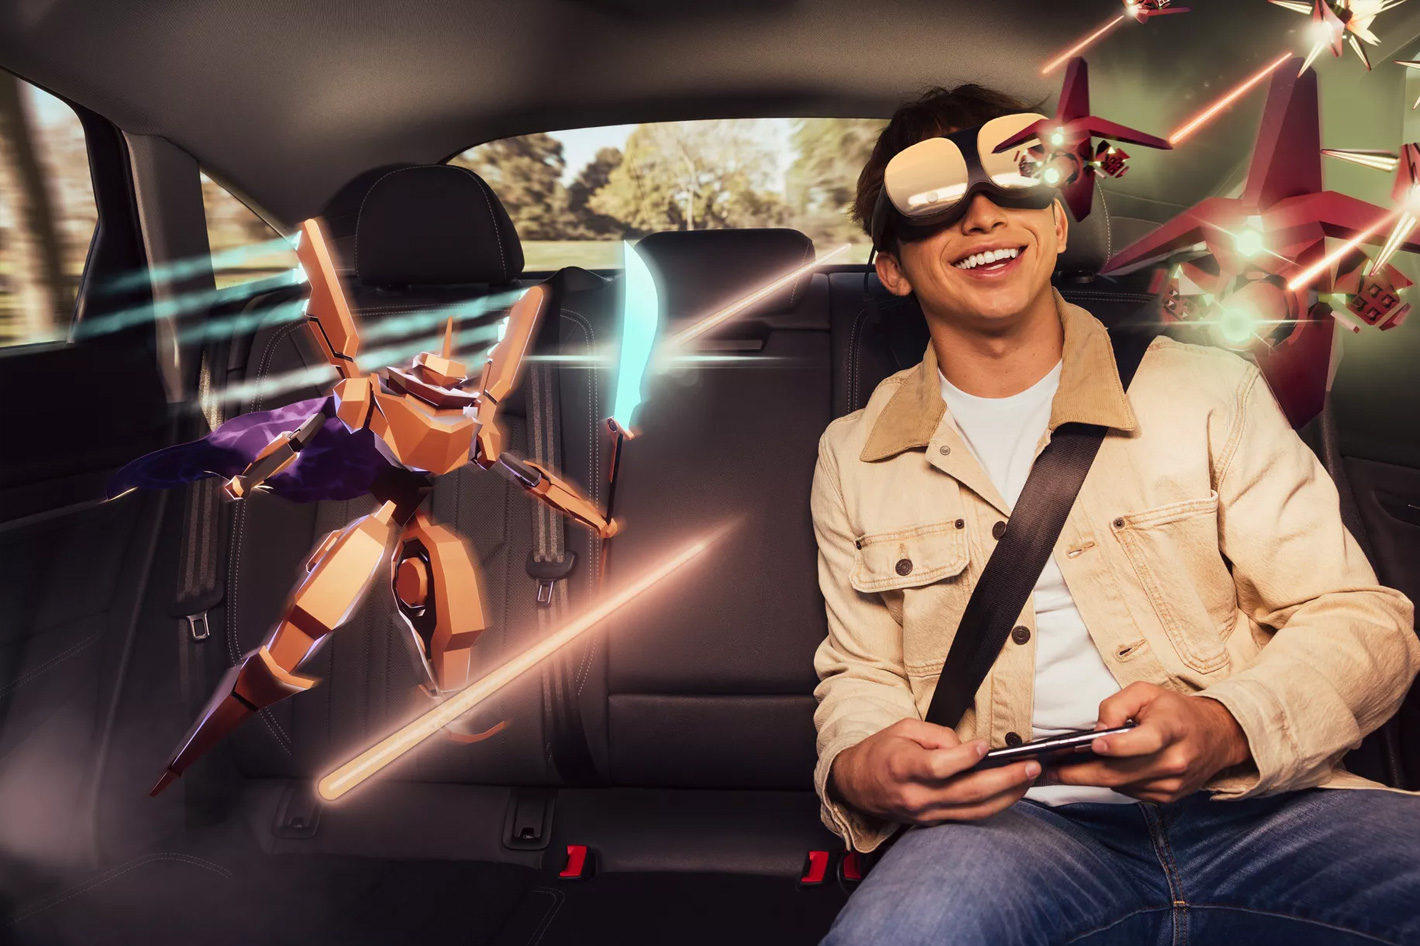 First holoride-ready VR device for in-car entertainment